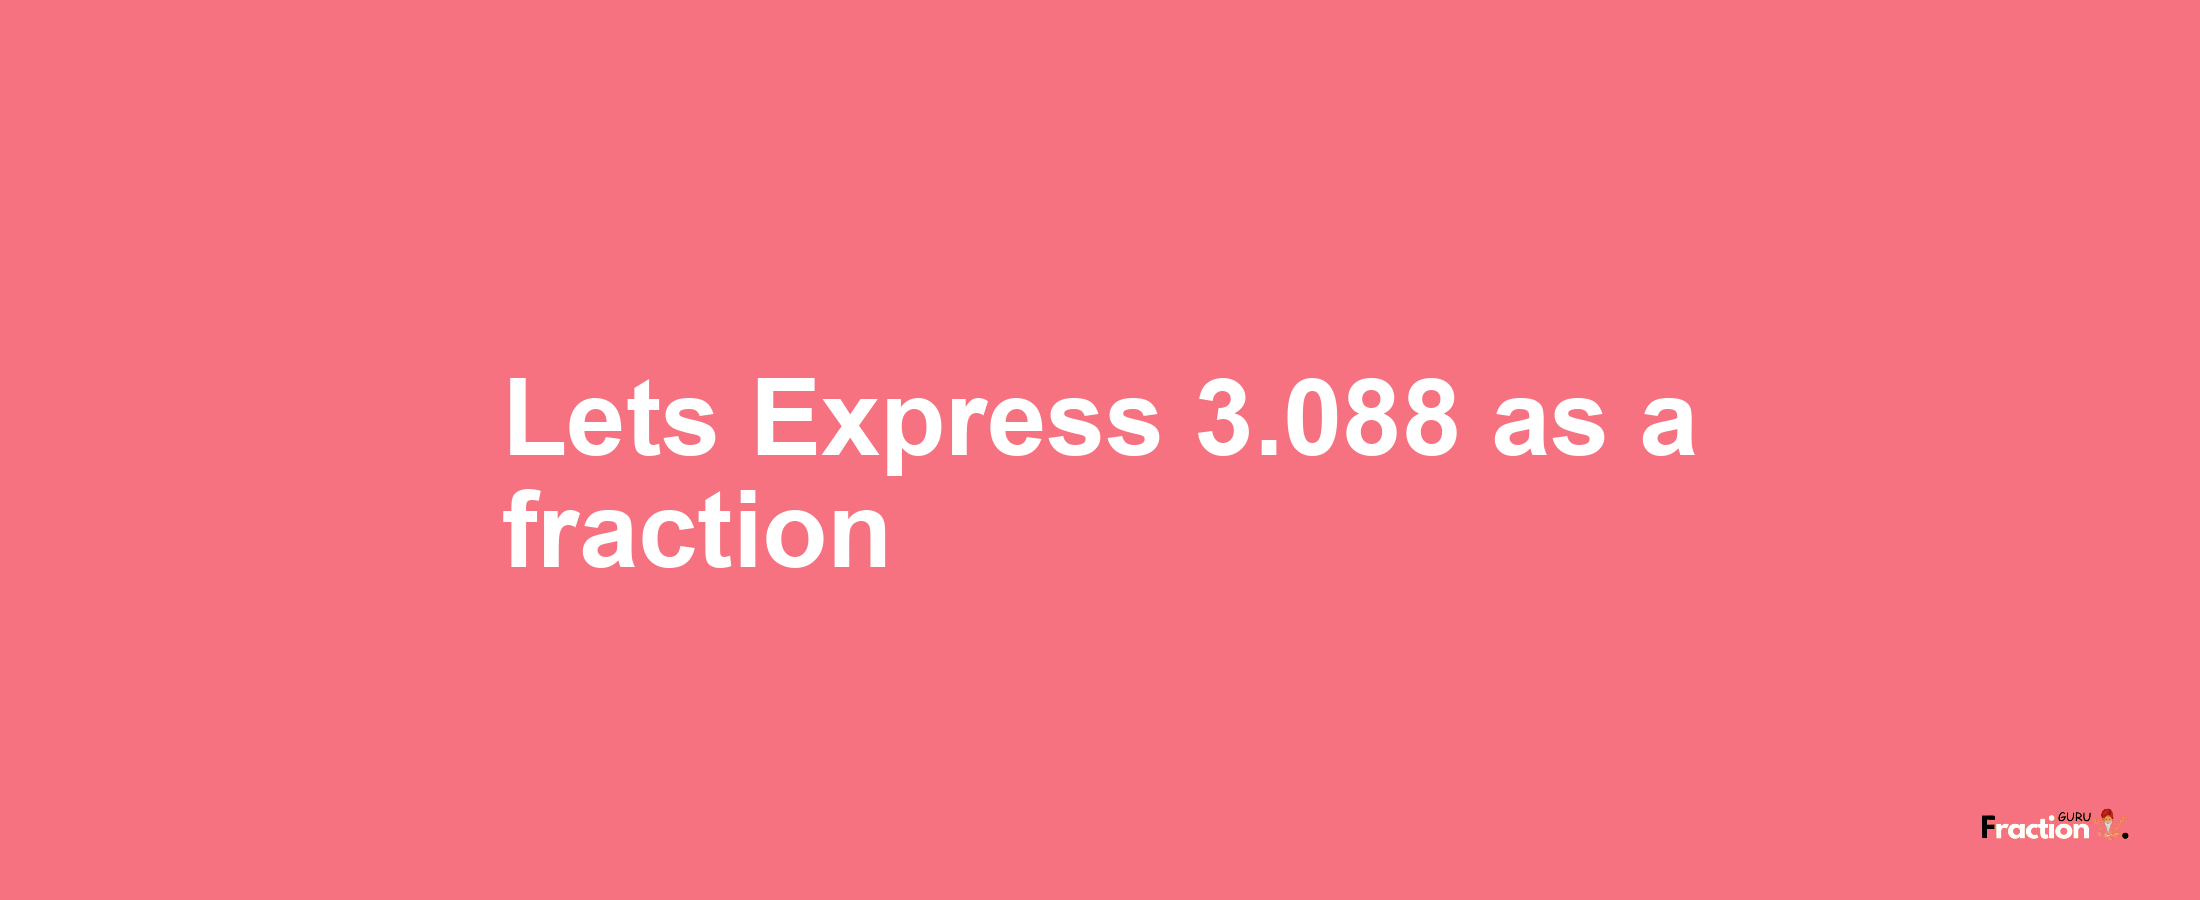 Lets Express 3.088 as afraction